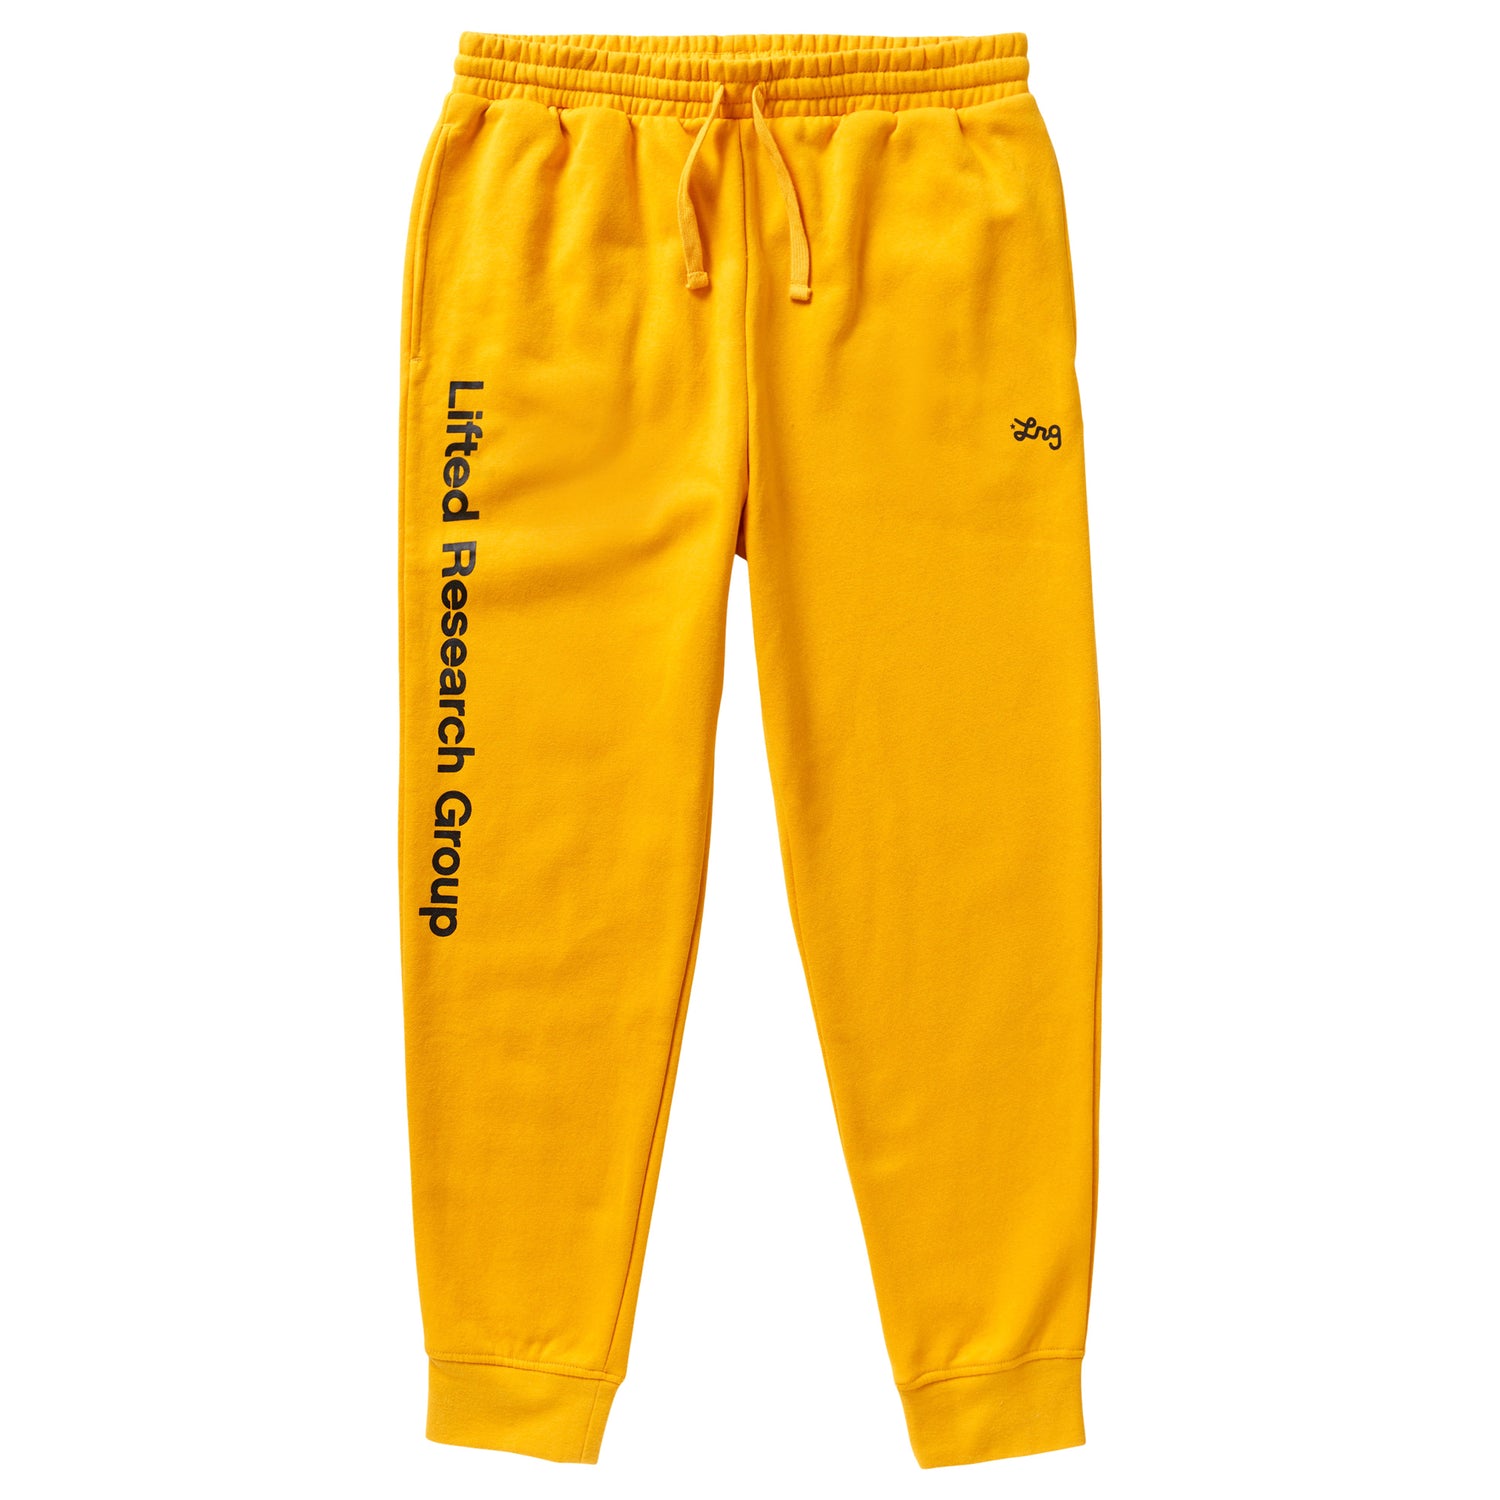  Siagua Yellow Lemon Sweatpants Outfit Costumes Pants for Men  Jogger Graphic Sport Workout Track Pants : Sports & Outdoors